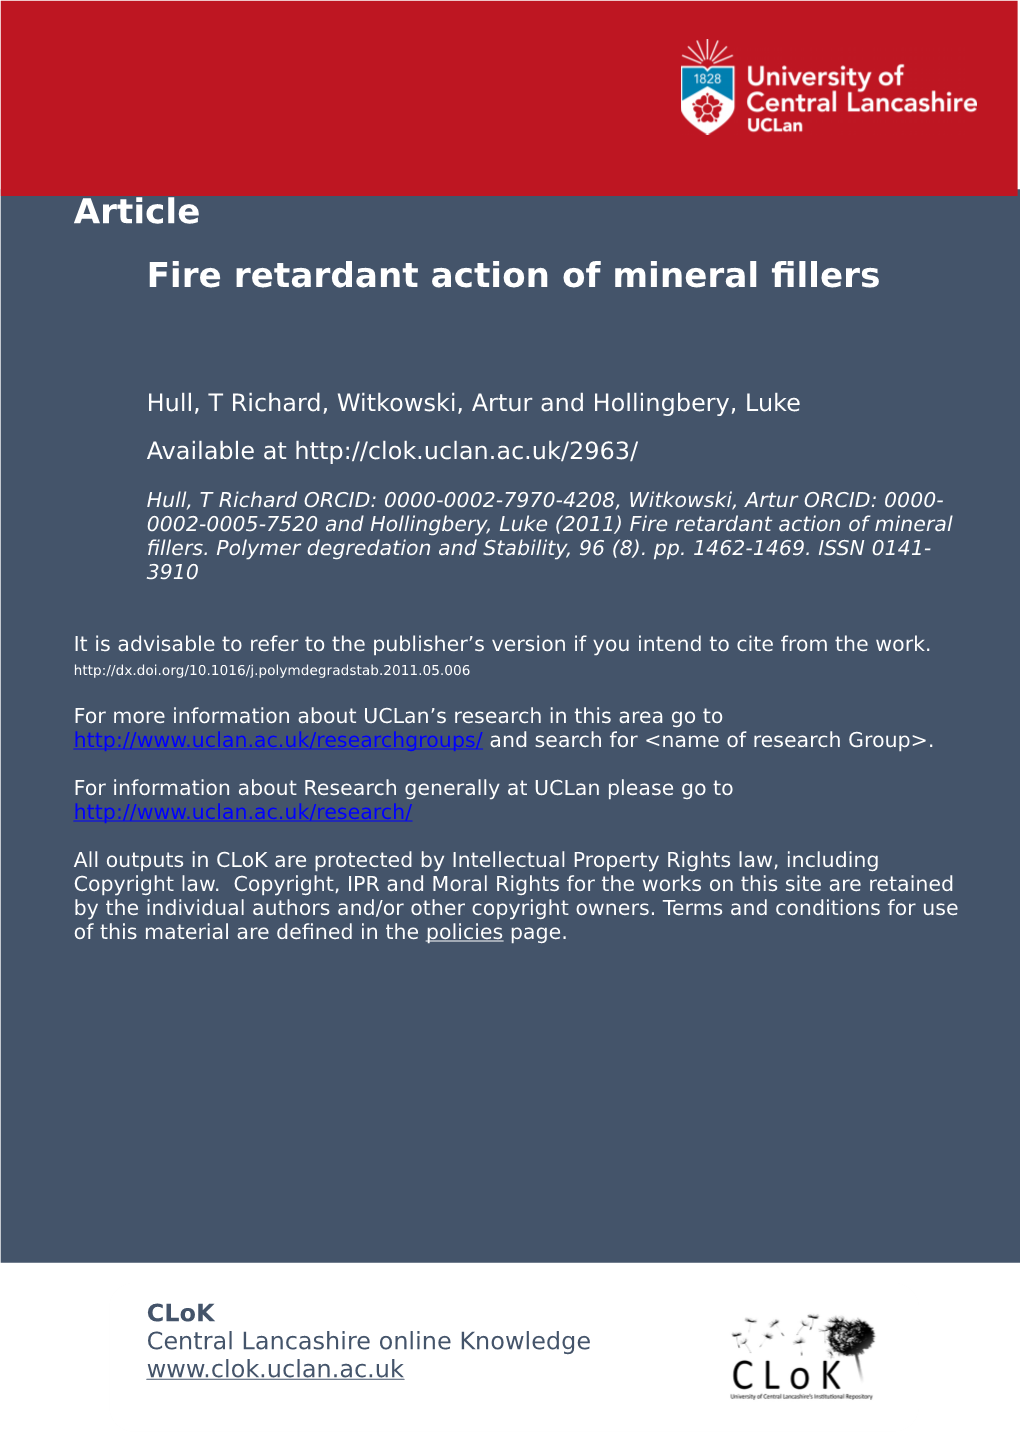 Fire Retardant Action of Mineral Fillers